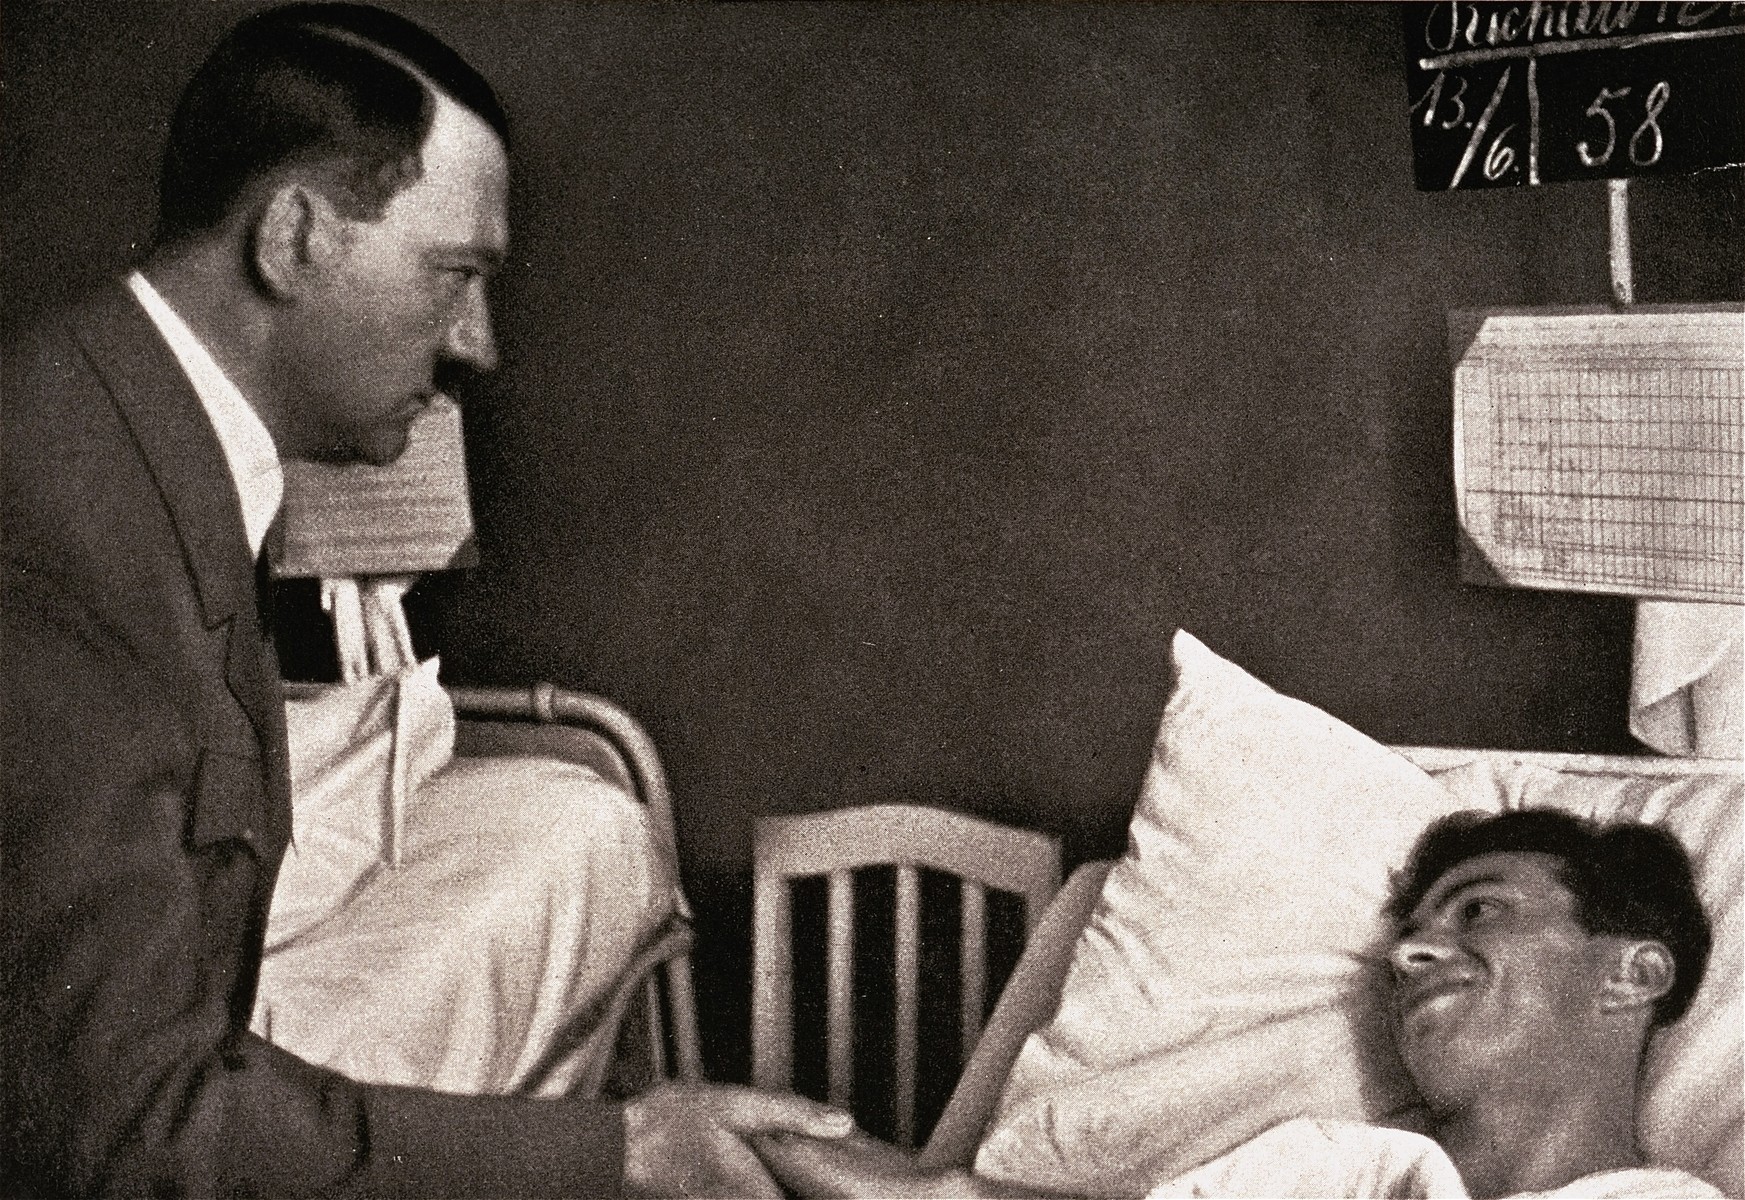 Adolf Hitler visits a hospital patient, who was one of "the victims of Reinsdorf.".